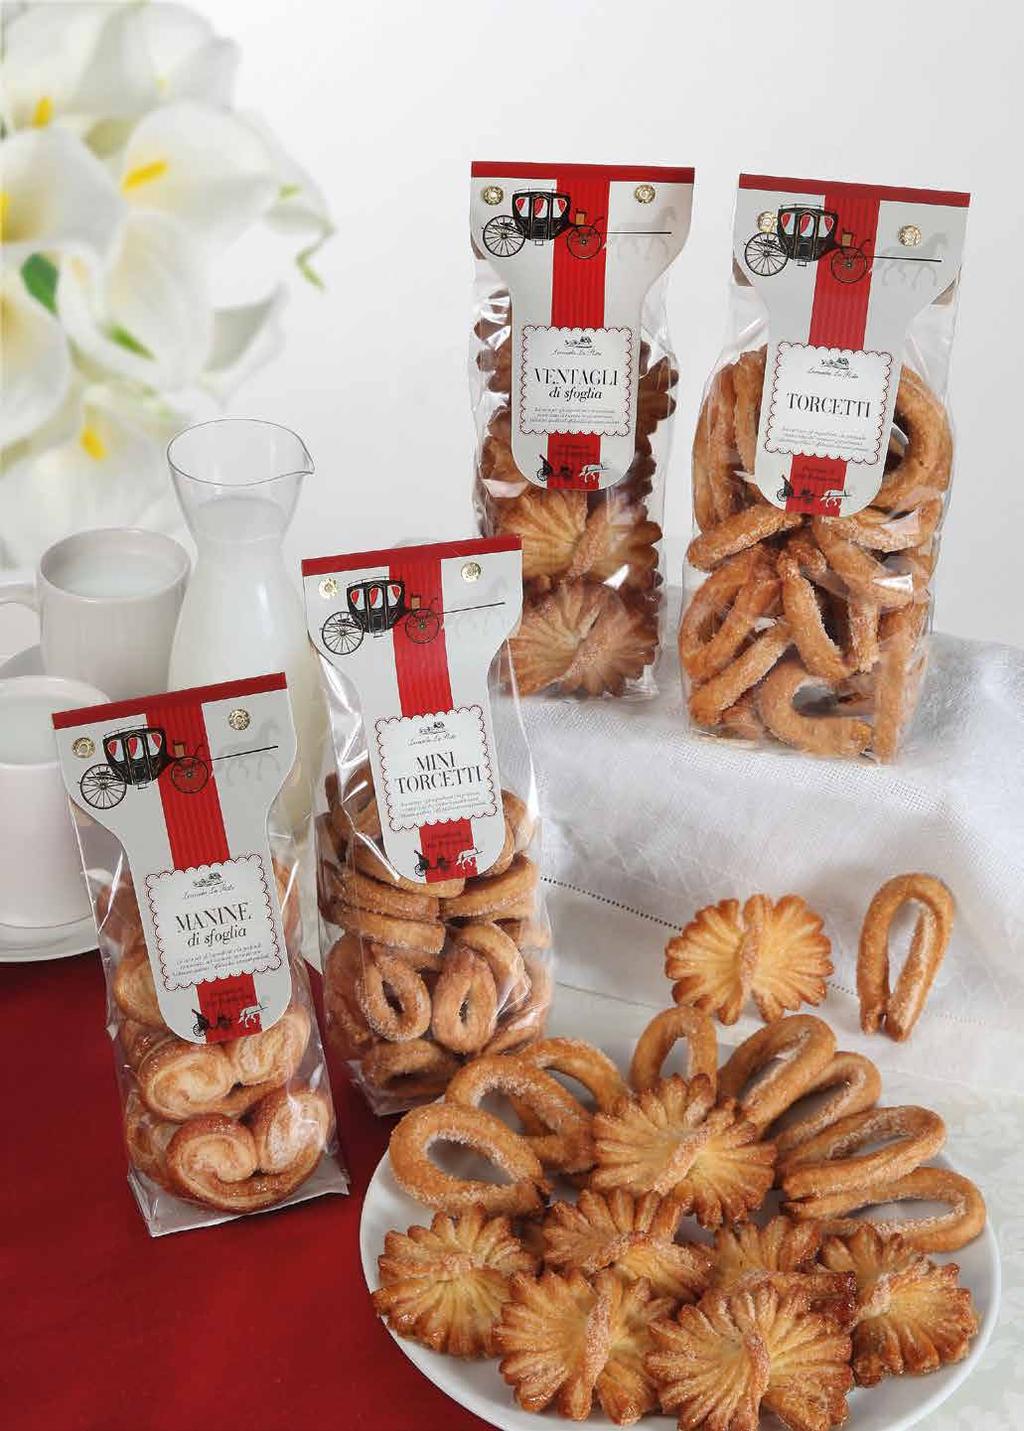 08543 08544 08547 Haute Patisserie - Bisquits Dyy loop-shaped biscuit typical of Piedmont 200 Fan shaped puff pastry biscuit